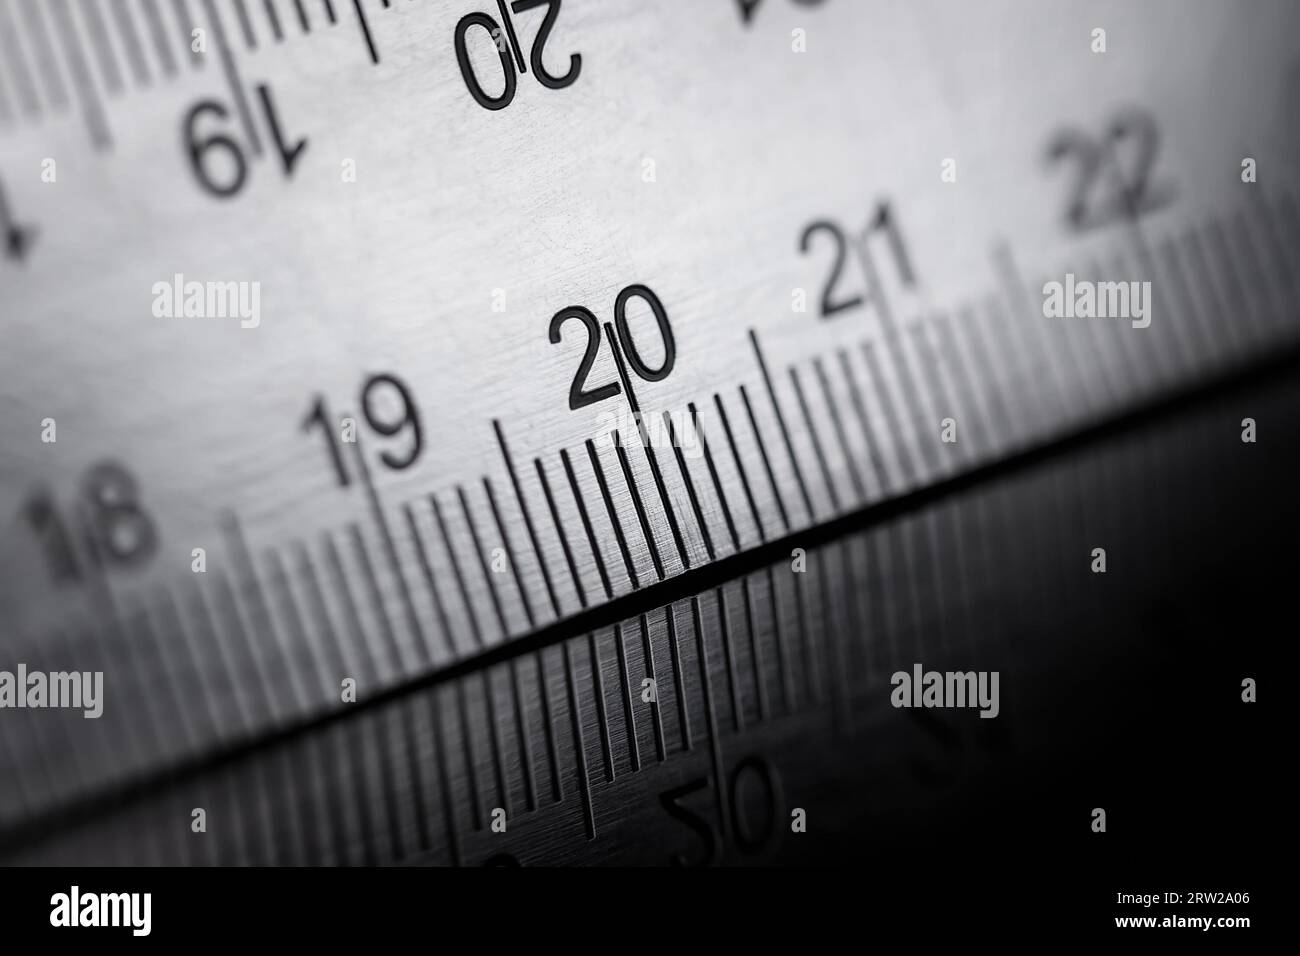 Metal ruler with shallow depth of field, reflection. Macro photography. Stock Photo